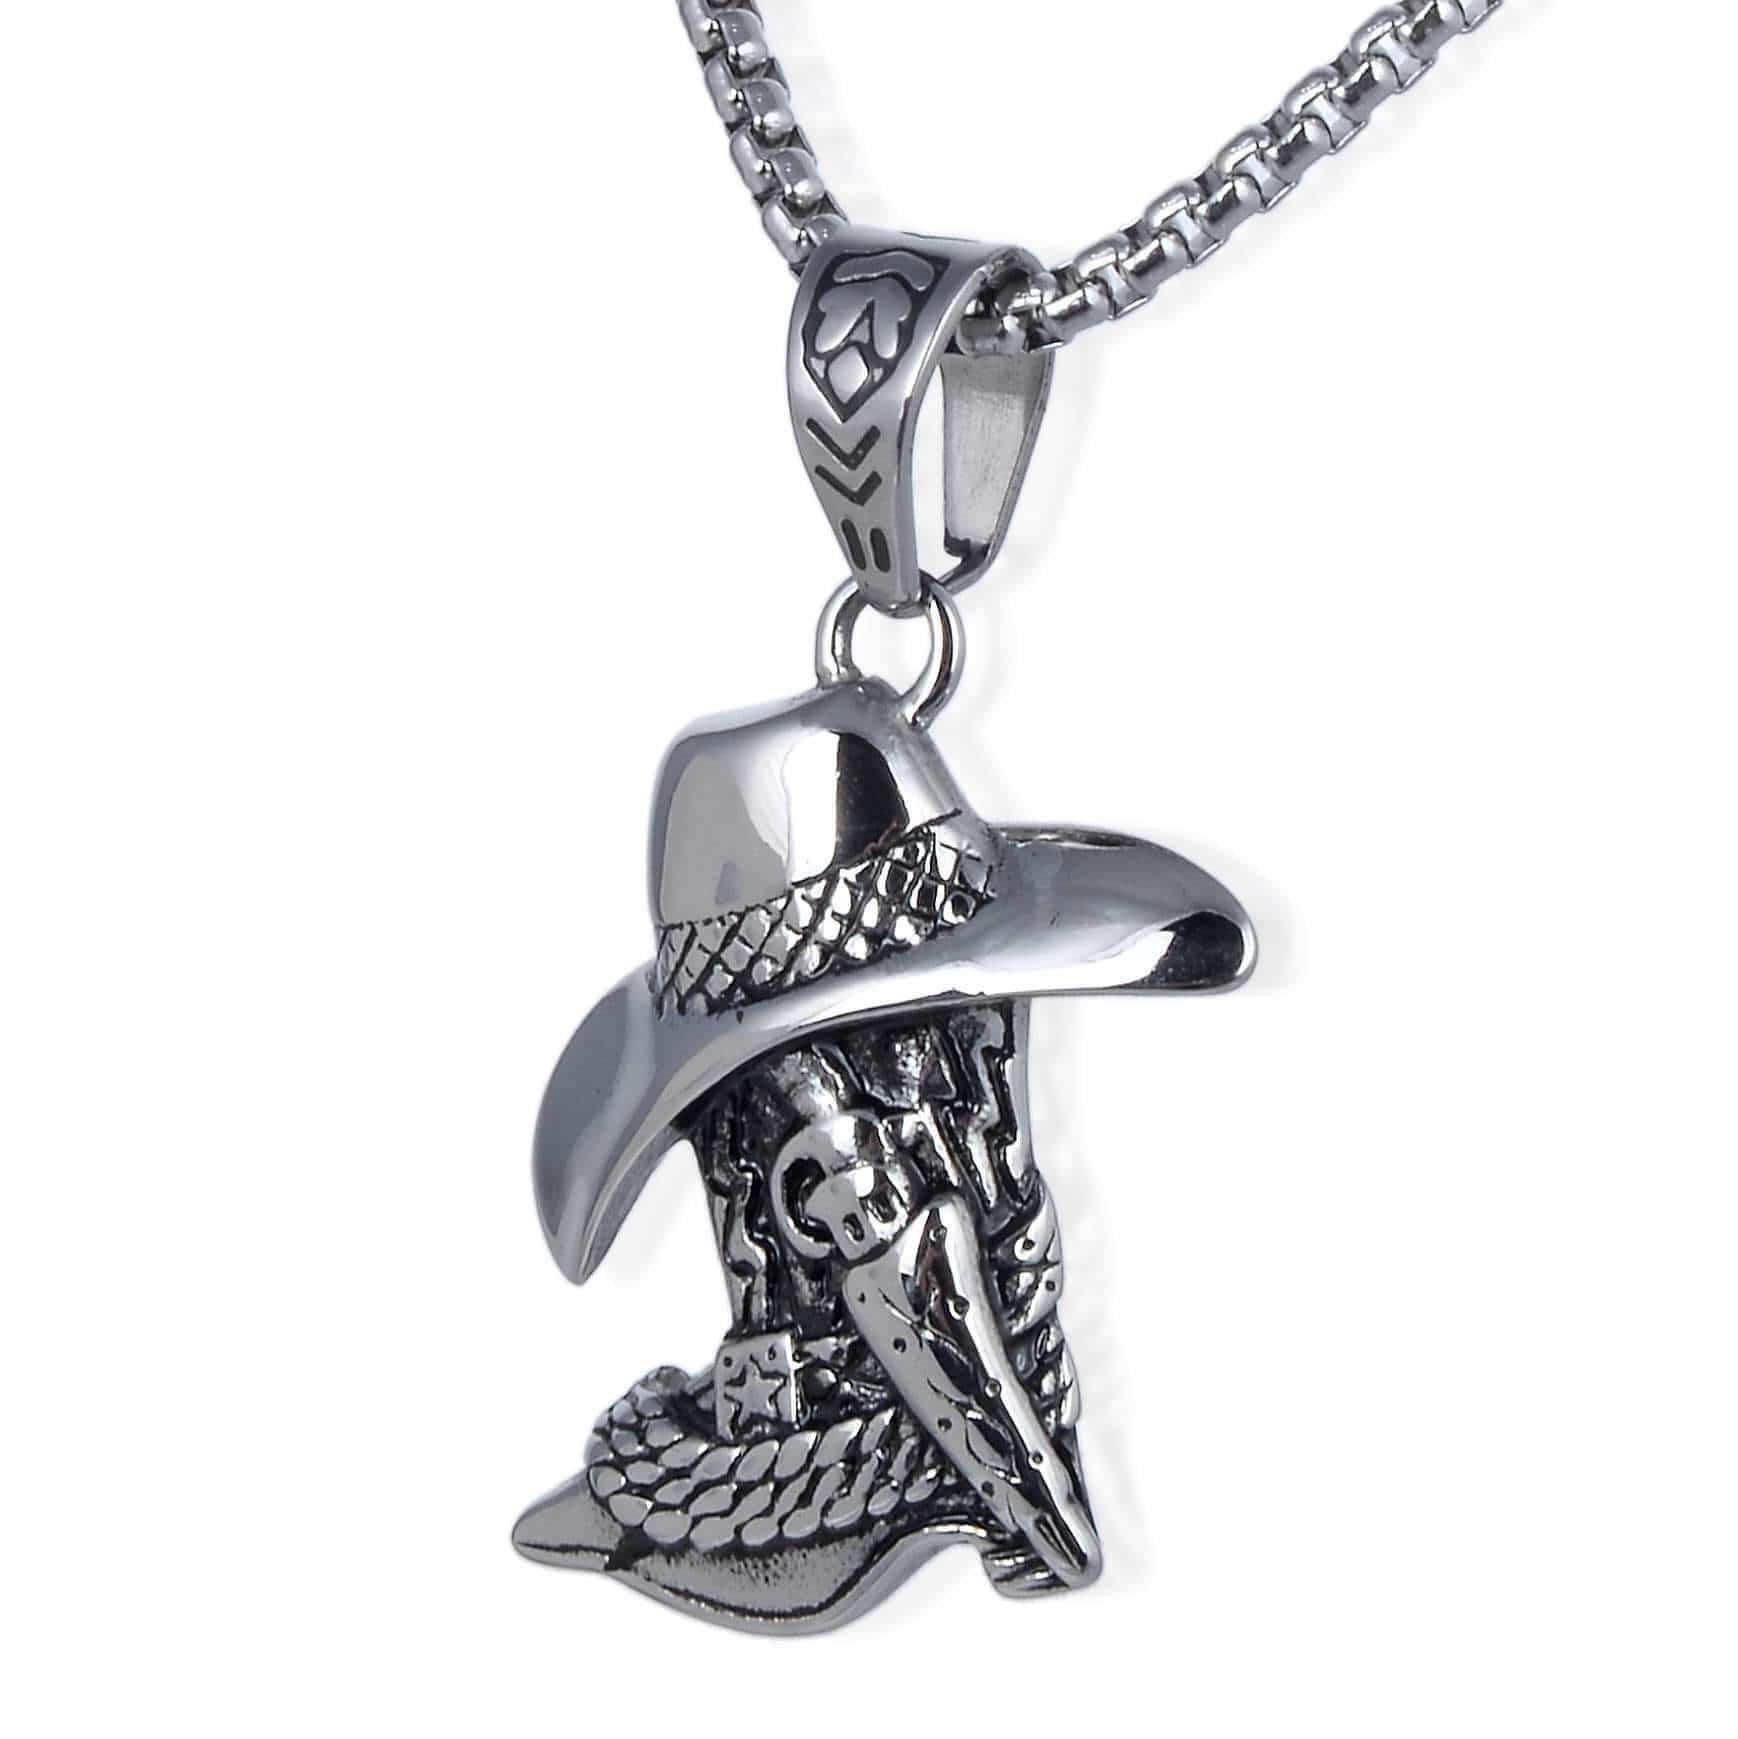 Kalifano Steel Hearts Jewelry Steel Hearts Cowboy Boot and Hat Necklace SHN120-61